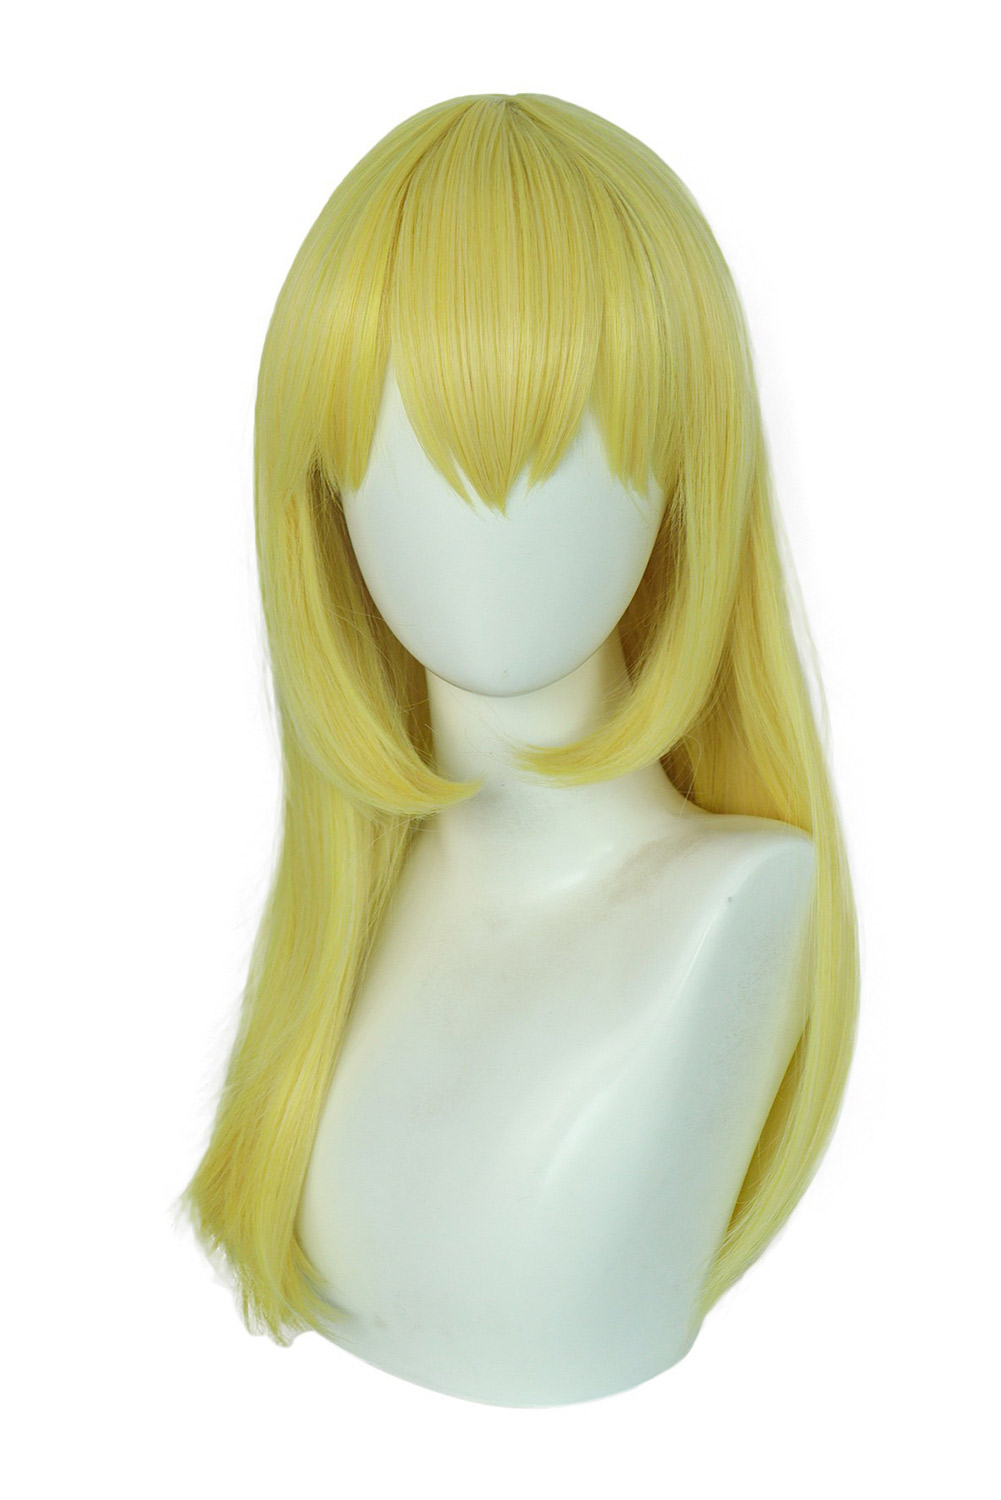 Anime Mashle: Magic and Muscles Season 2 - Lemon Irvine Cosplay Wig Heat Resistant Synthetic Hair Halloween Costume Accessories